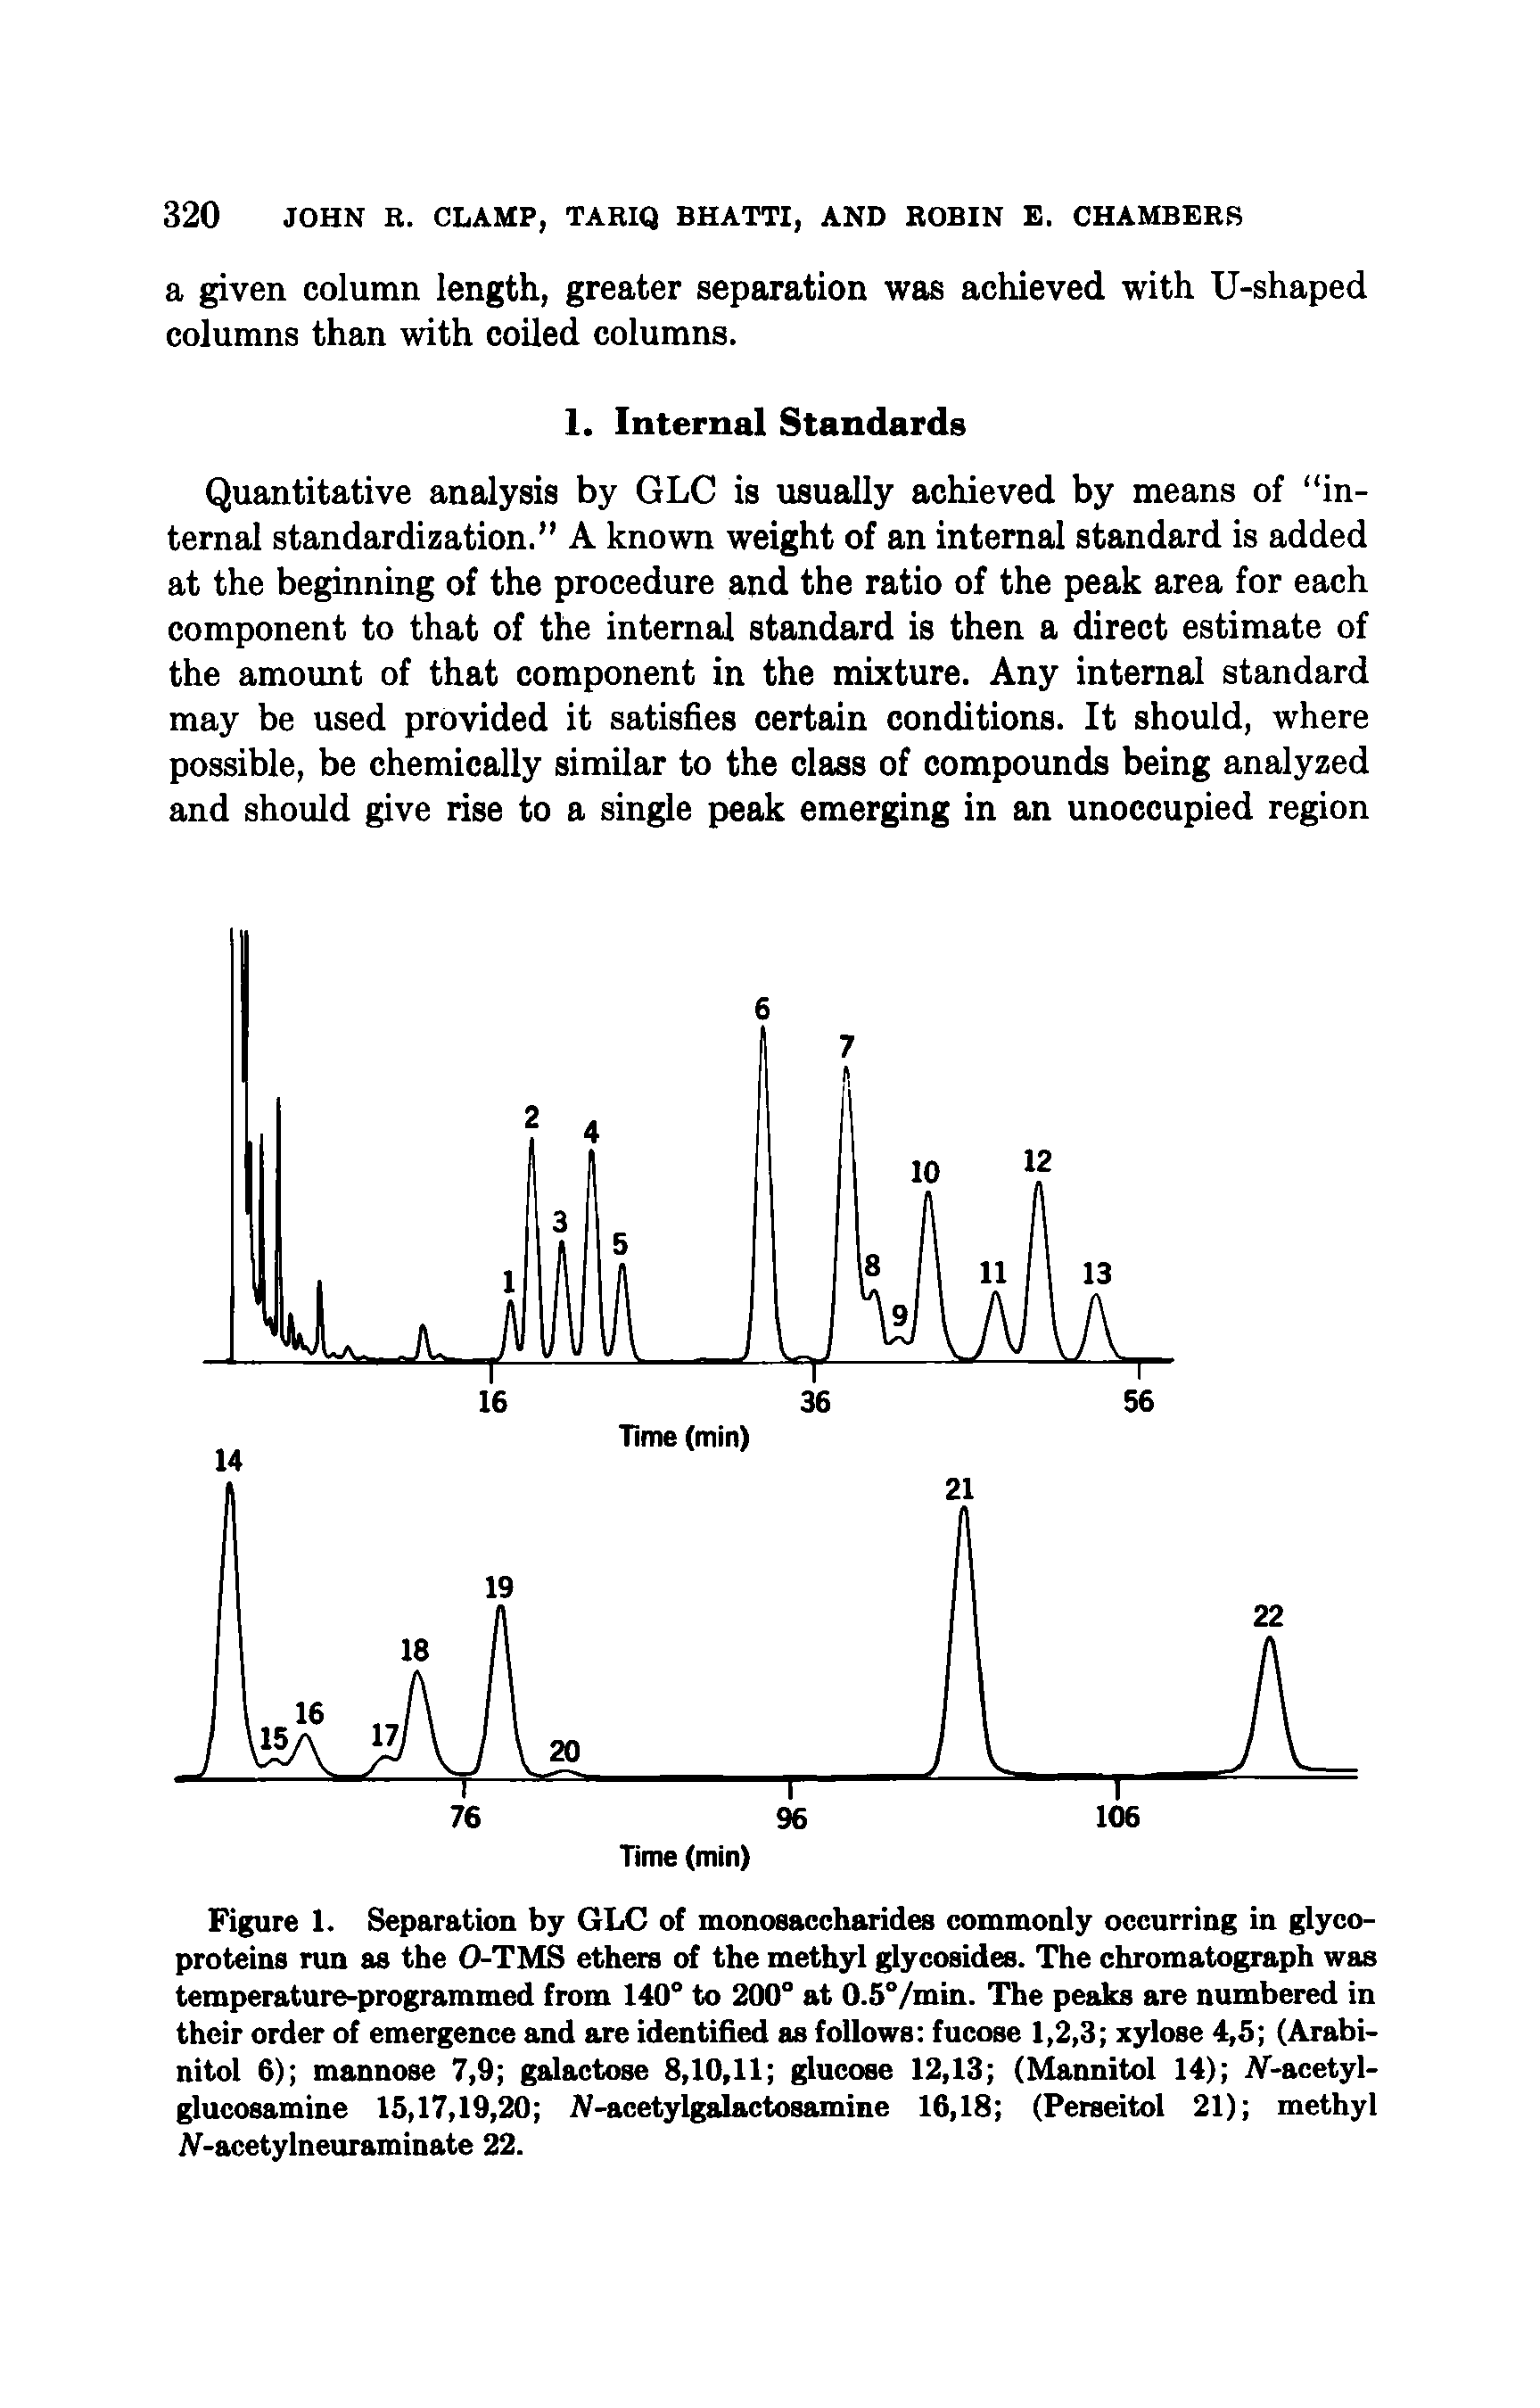 Figure 1. Separation by GLC of monosaccharides commonly occurring in glycoproteins run as the 0-TMS ethers of the methyl glycosides. The chromatograph was temperature-programmed from 140° to 200° at 0.5°/min. The peaks are numbered in their order of emergence and are identified as follows fucose 1,2,3 xylose 4,5 (Arabi-nitol 6) mannose 7,9 galactose 8,10,11 glucose 12,13 (Mannitol 14) AT-acetyl-glucosamine 15,17,19,20 iV-acetylgalactosamine 16,18 (Perseitol 21) methyl -acetylneuraminate 22.